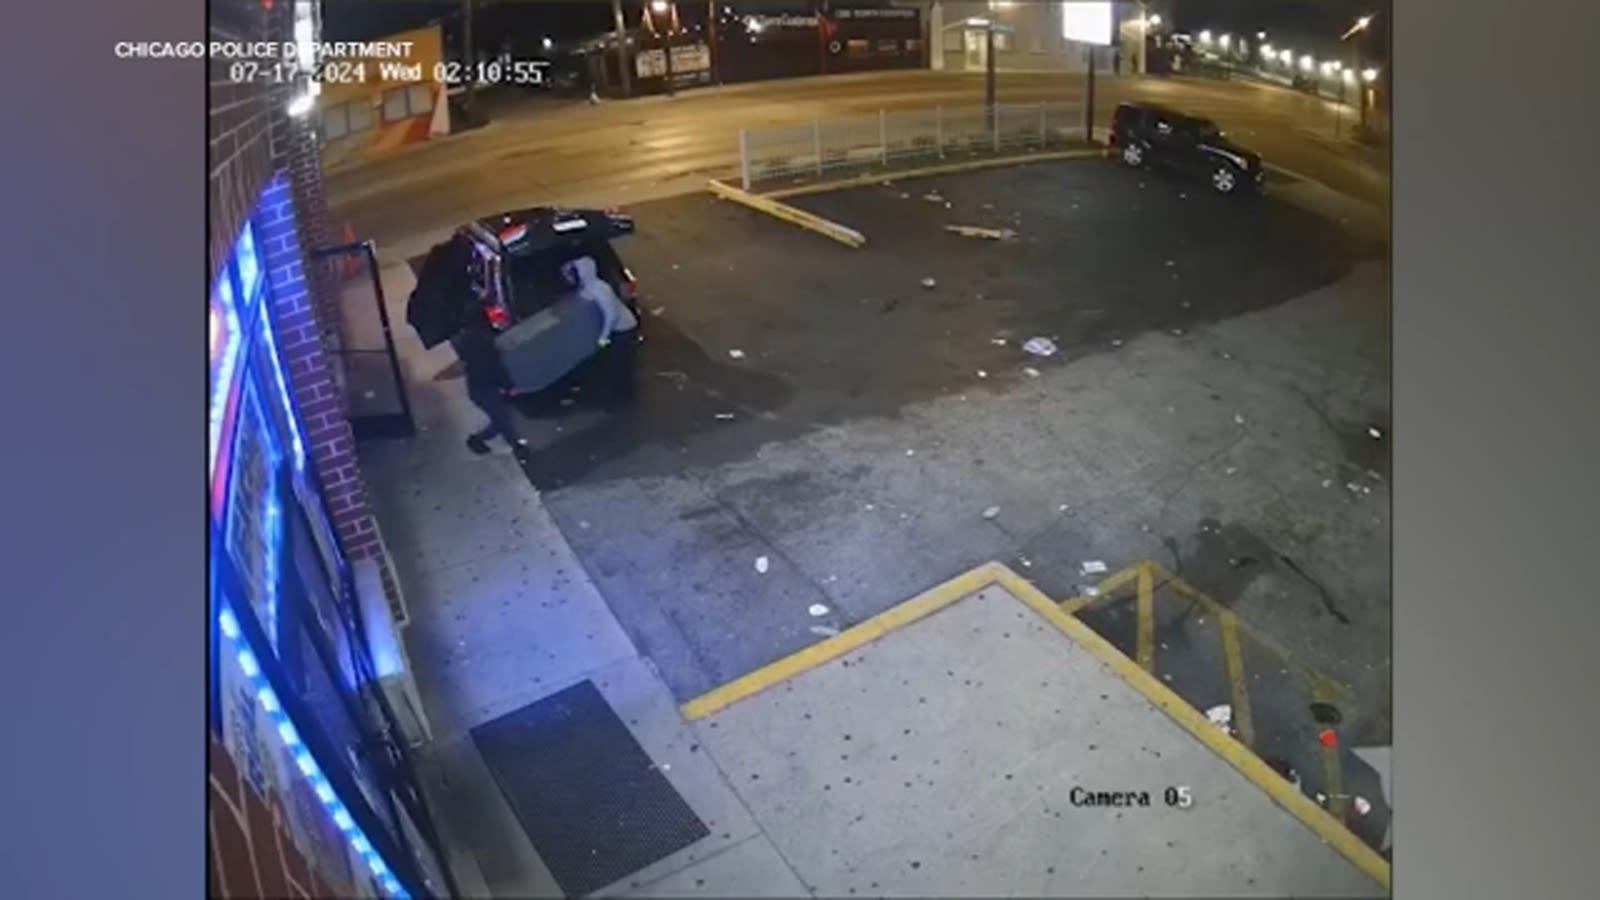 Chicago police issue warning after recent smash-and-grab burglaries at West Side businesses